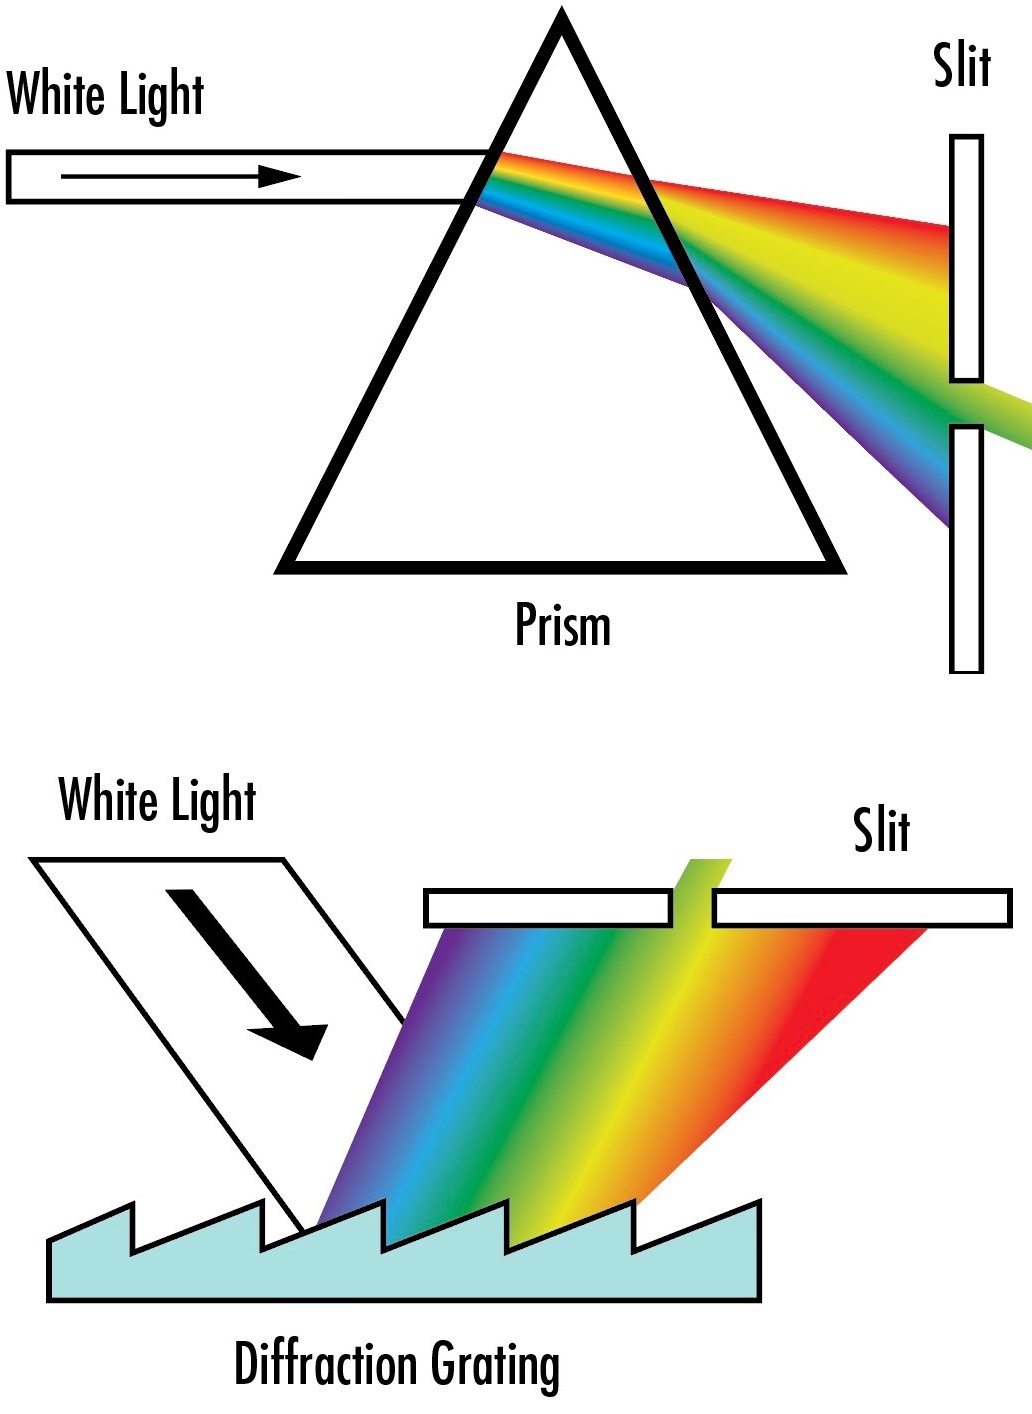 While dispersion prisms separate wavelengths through refraction (top), diffraction gratings instead separate wavelengths through diffraction because of their surface structure (bottom)